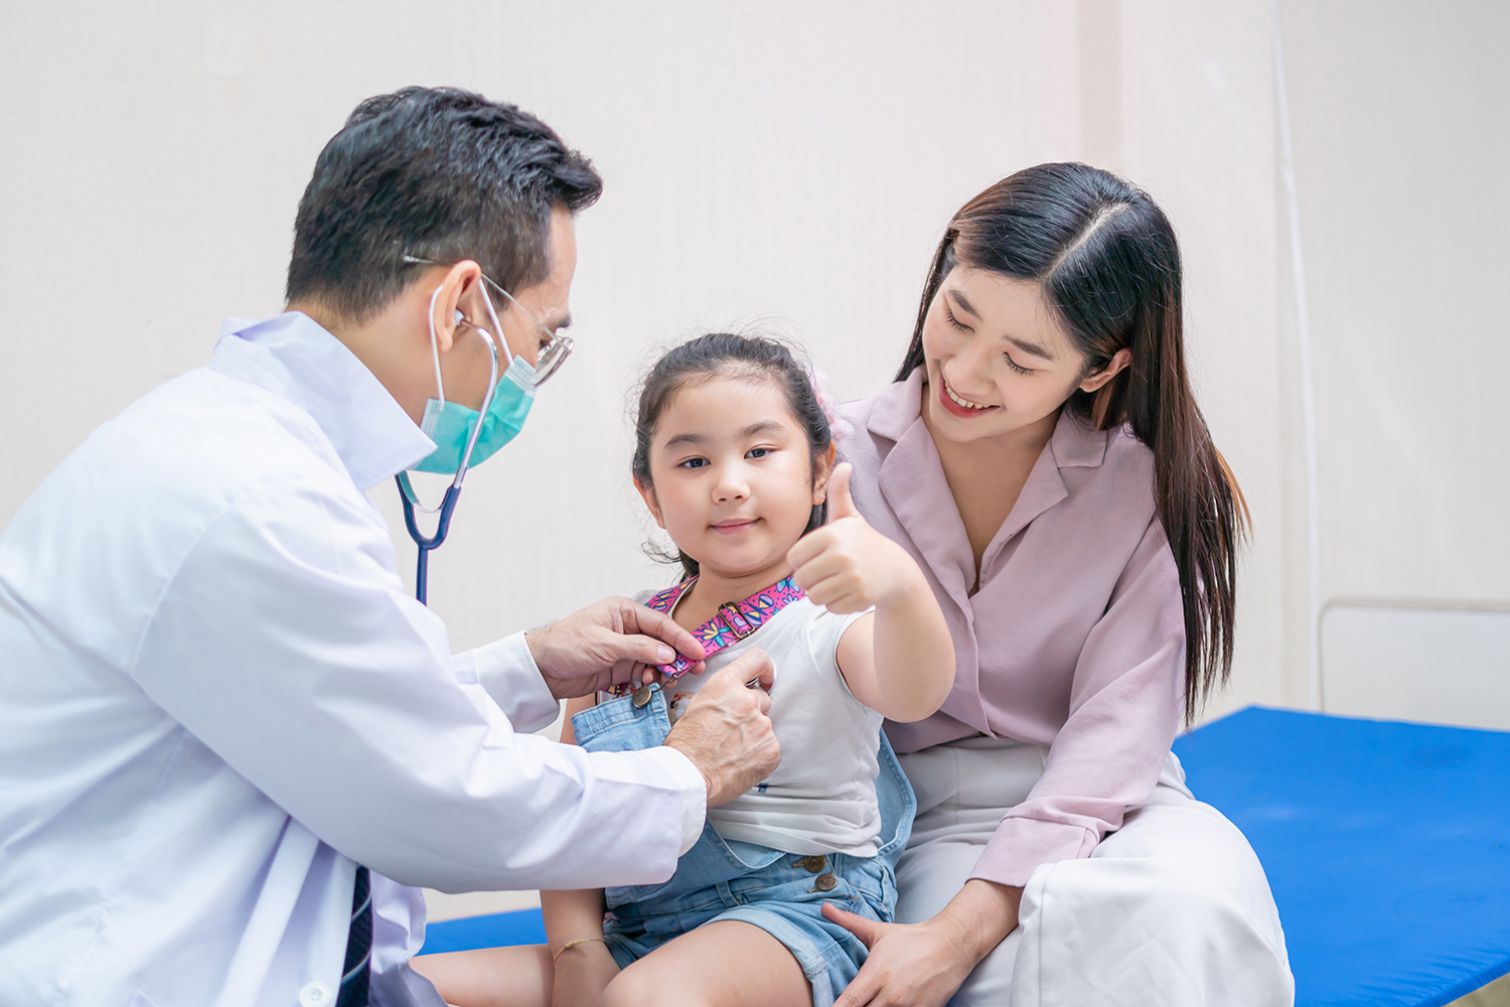 Happy child is examined by doctor